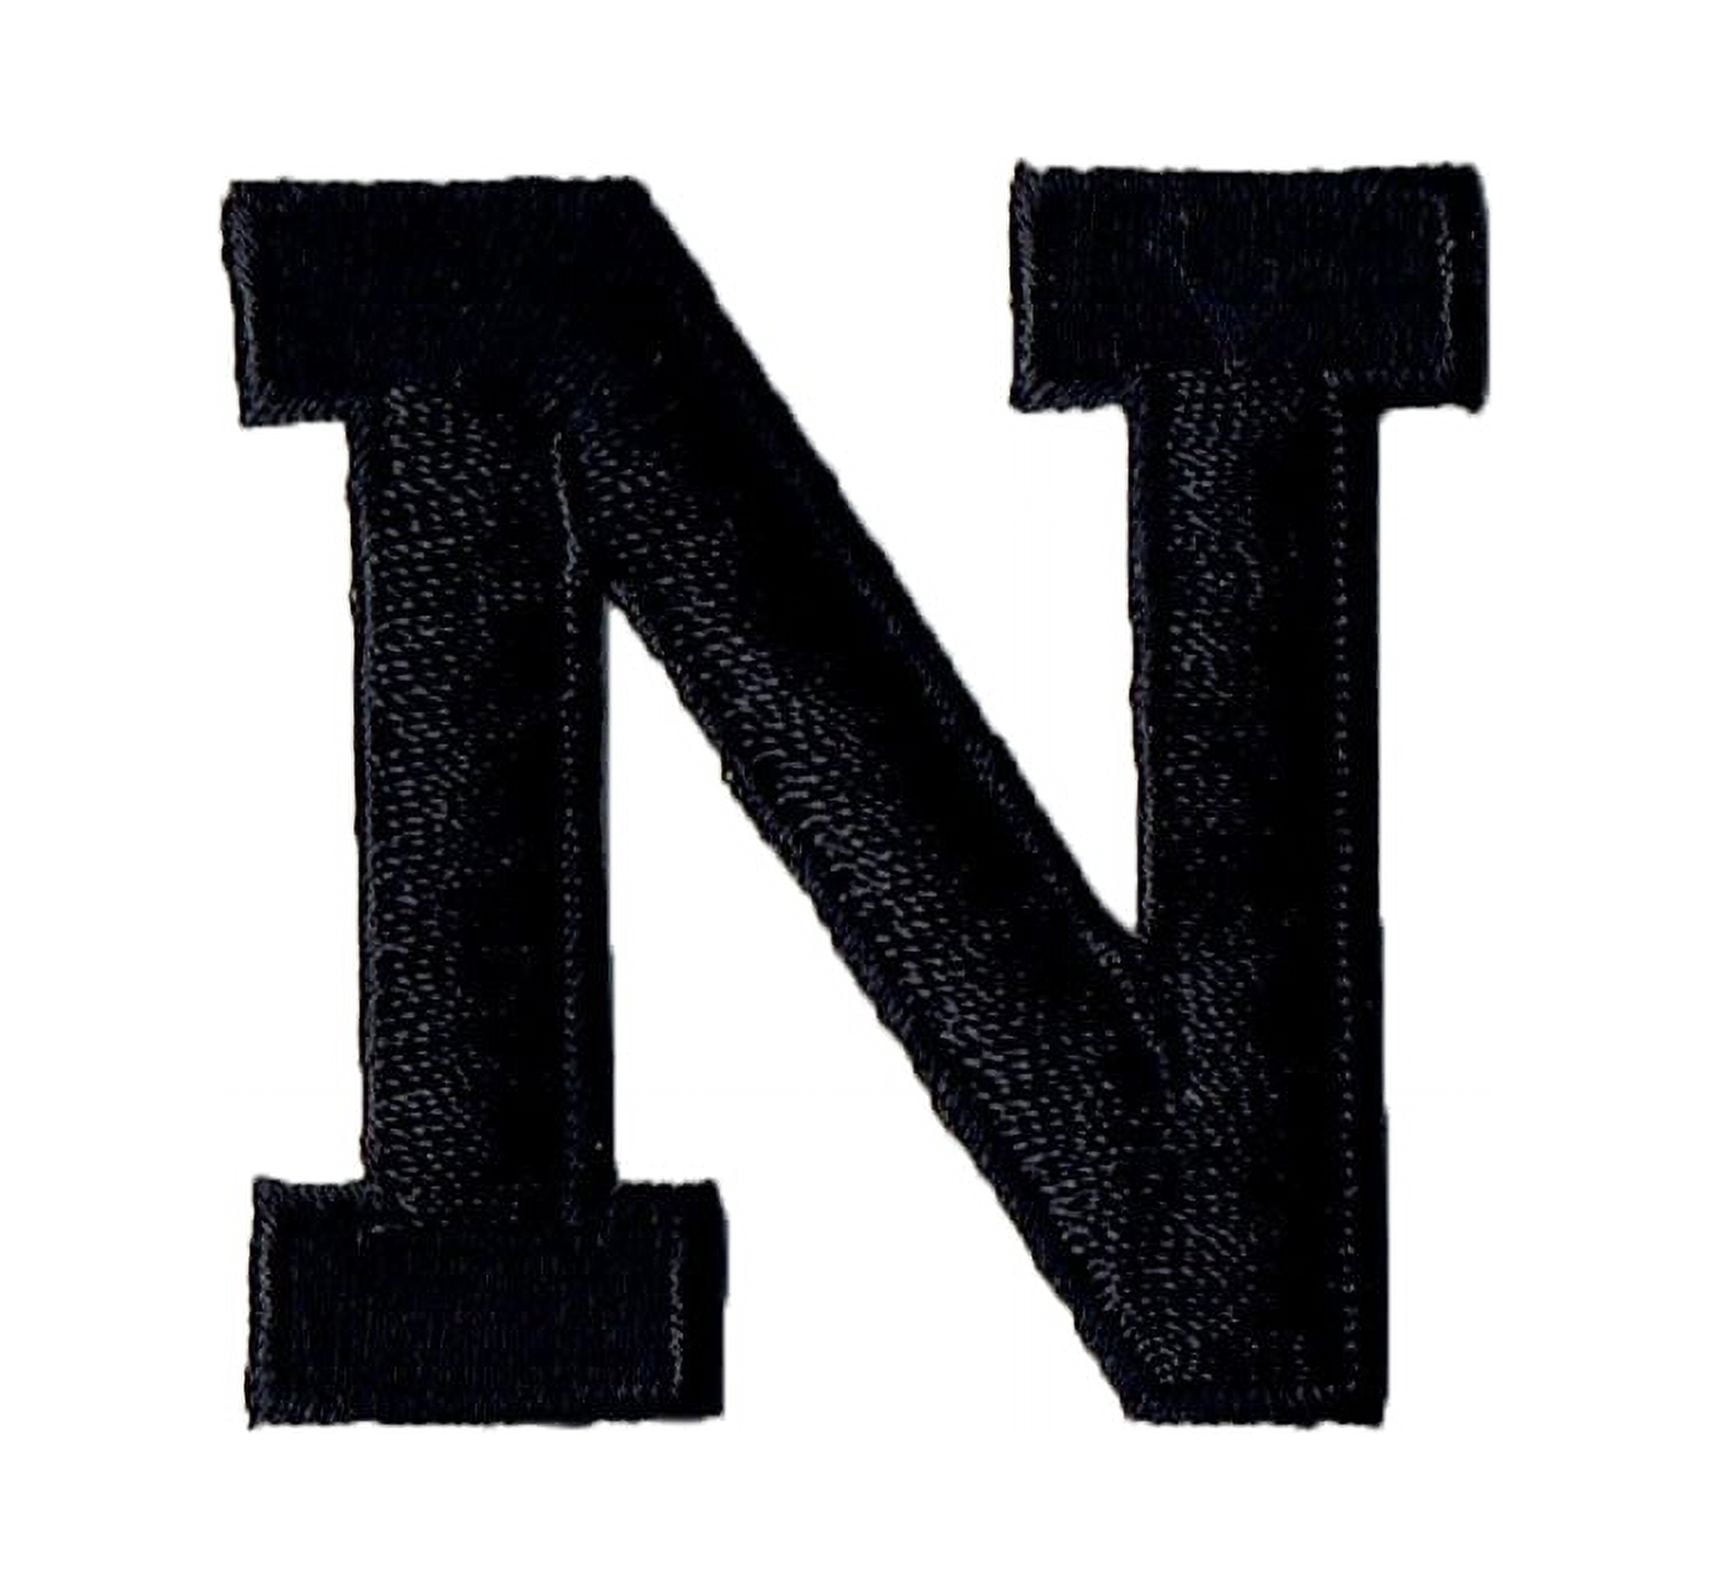 Charcoal Gray Wool Applique, 2 inch Uppercase Letters Backed with